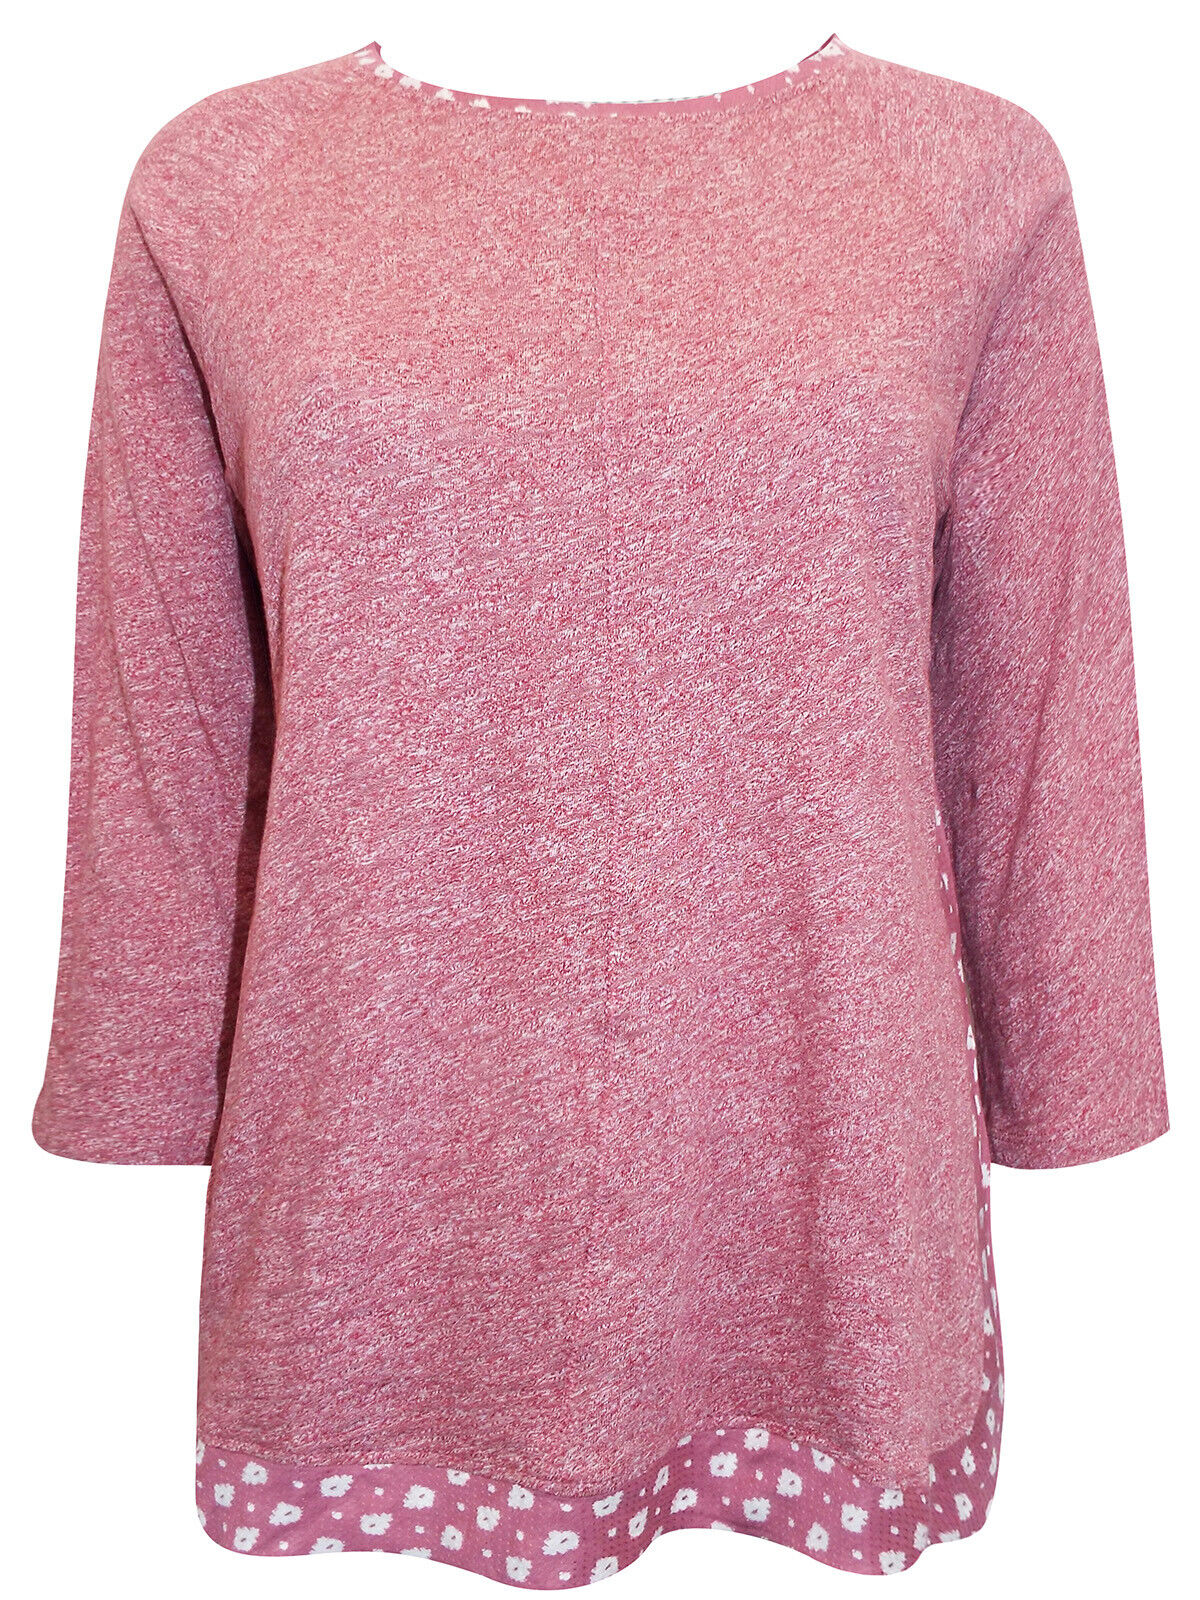 EX WHITE STUFF Rose Selma Jersey T-Shirt in Sizes 12 or 16 RRP £32